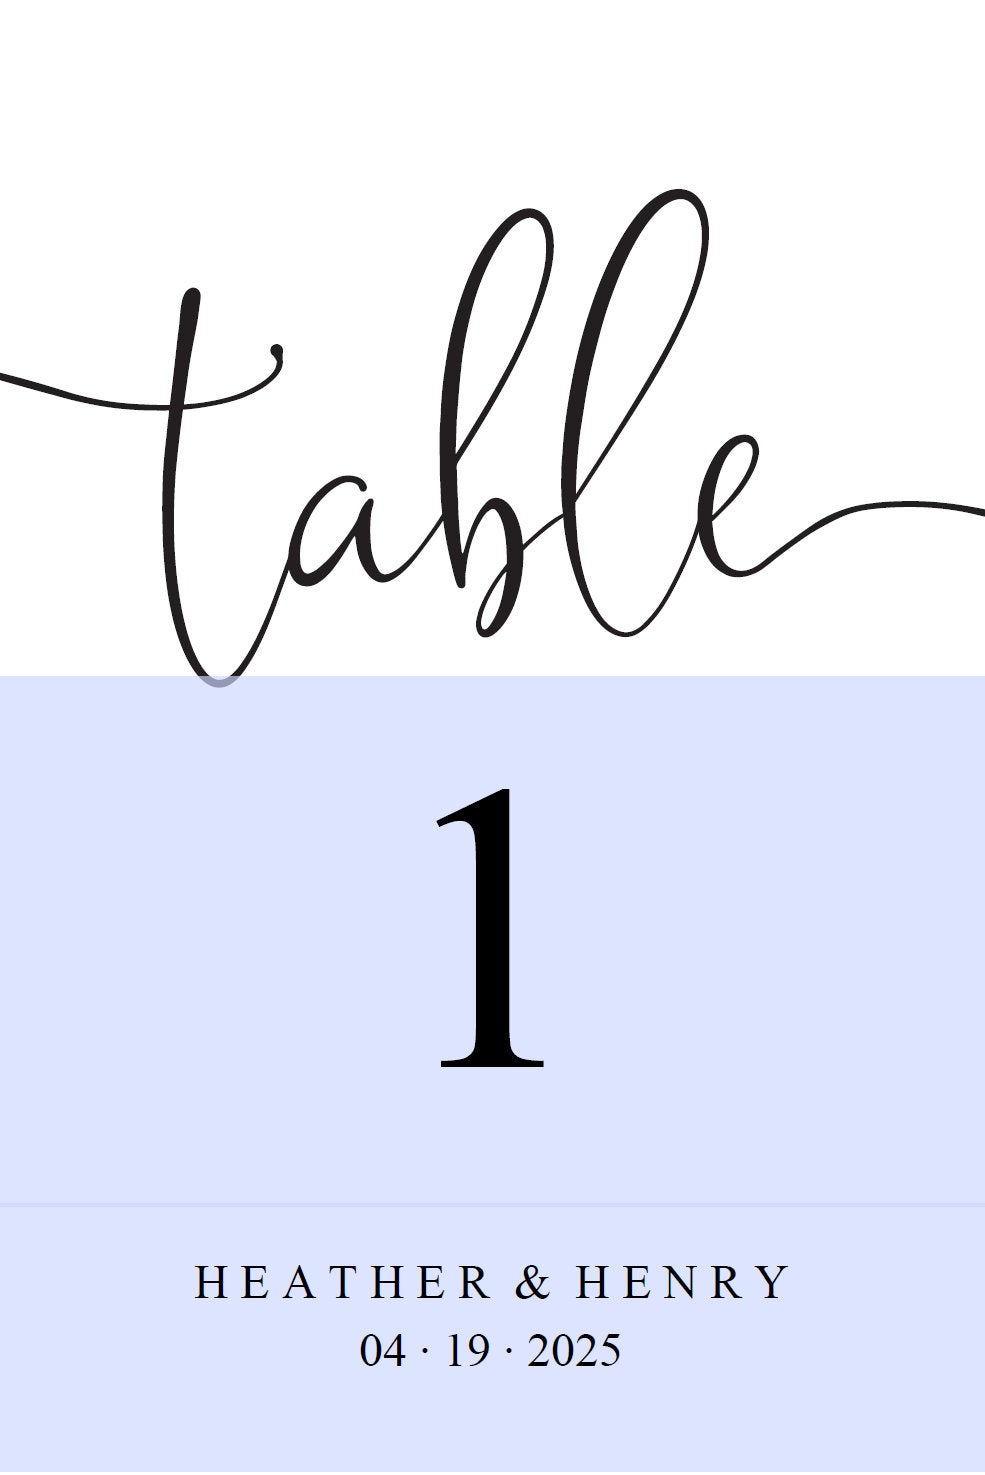 Simple Wedding Table Number, Wedding Table Printable Numbers Instant Download, DIY Table Numbers Cards, Calligraphy Rustic  -Heather  SAVVY PAPER CO